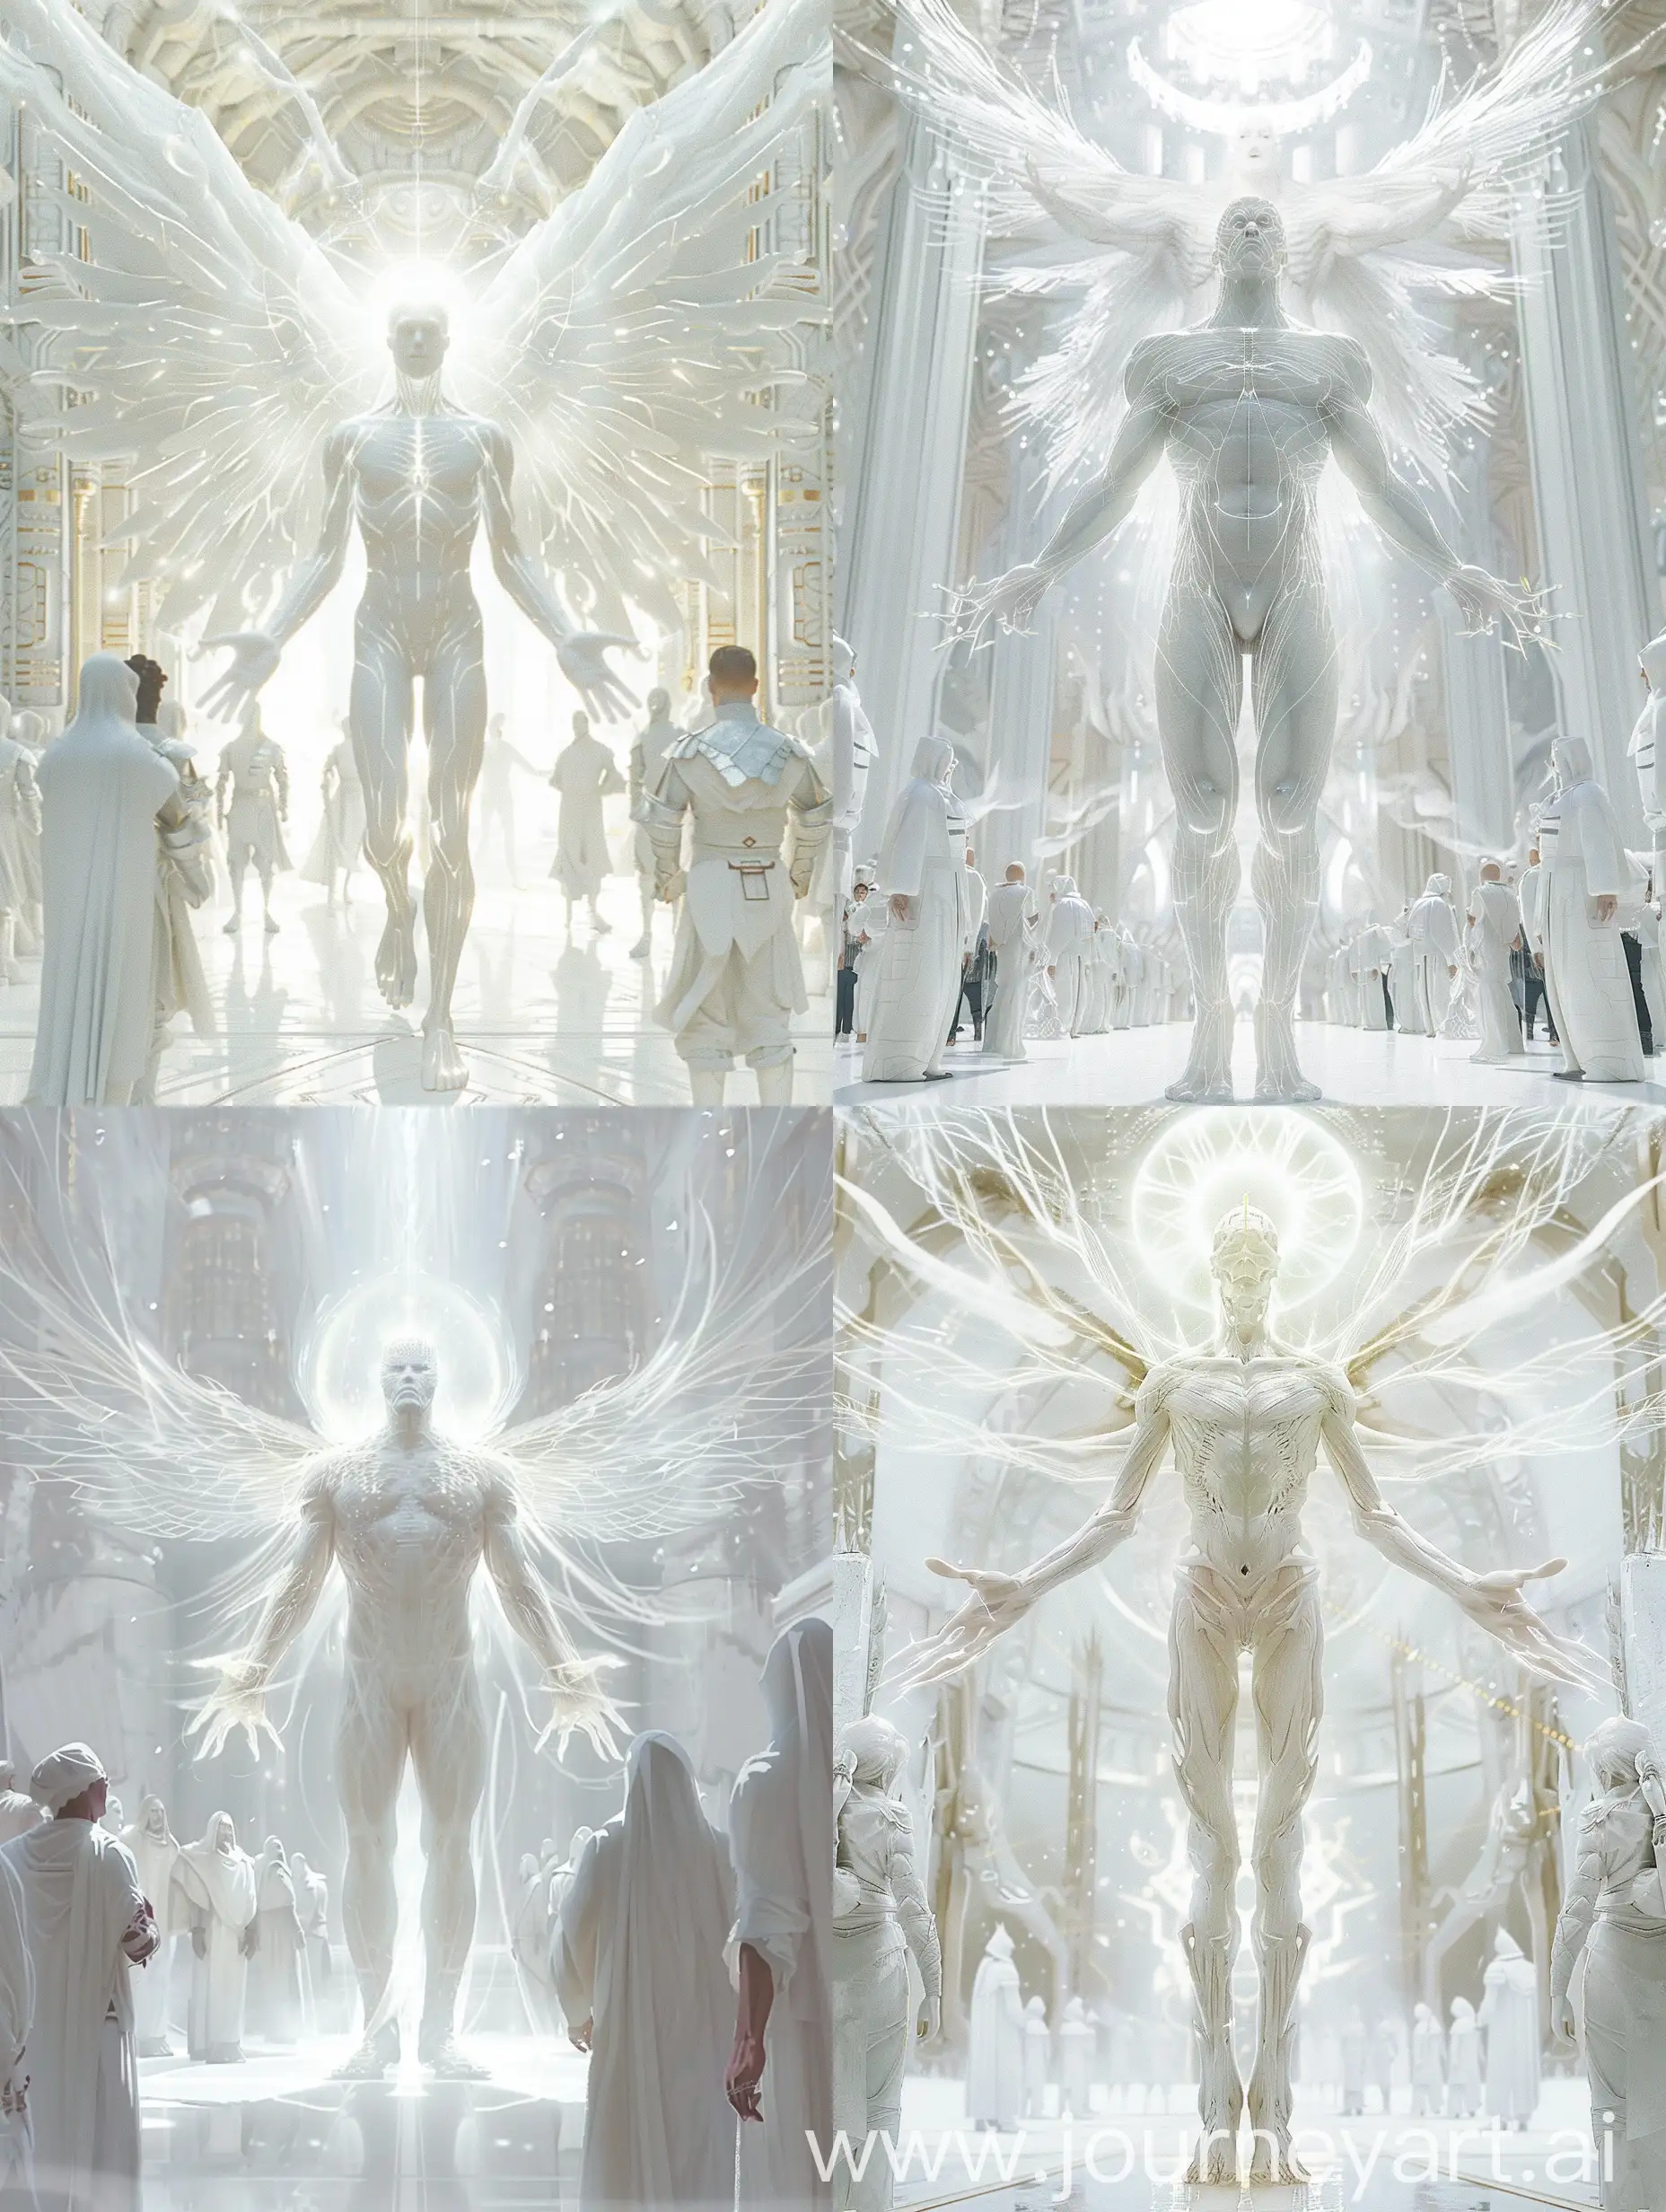 Celestial-Being-with-Six-Arms-and-Halo-in-Snowwhite-Temple